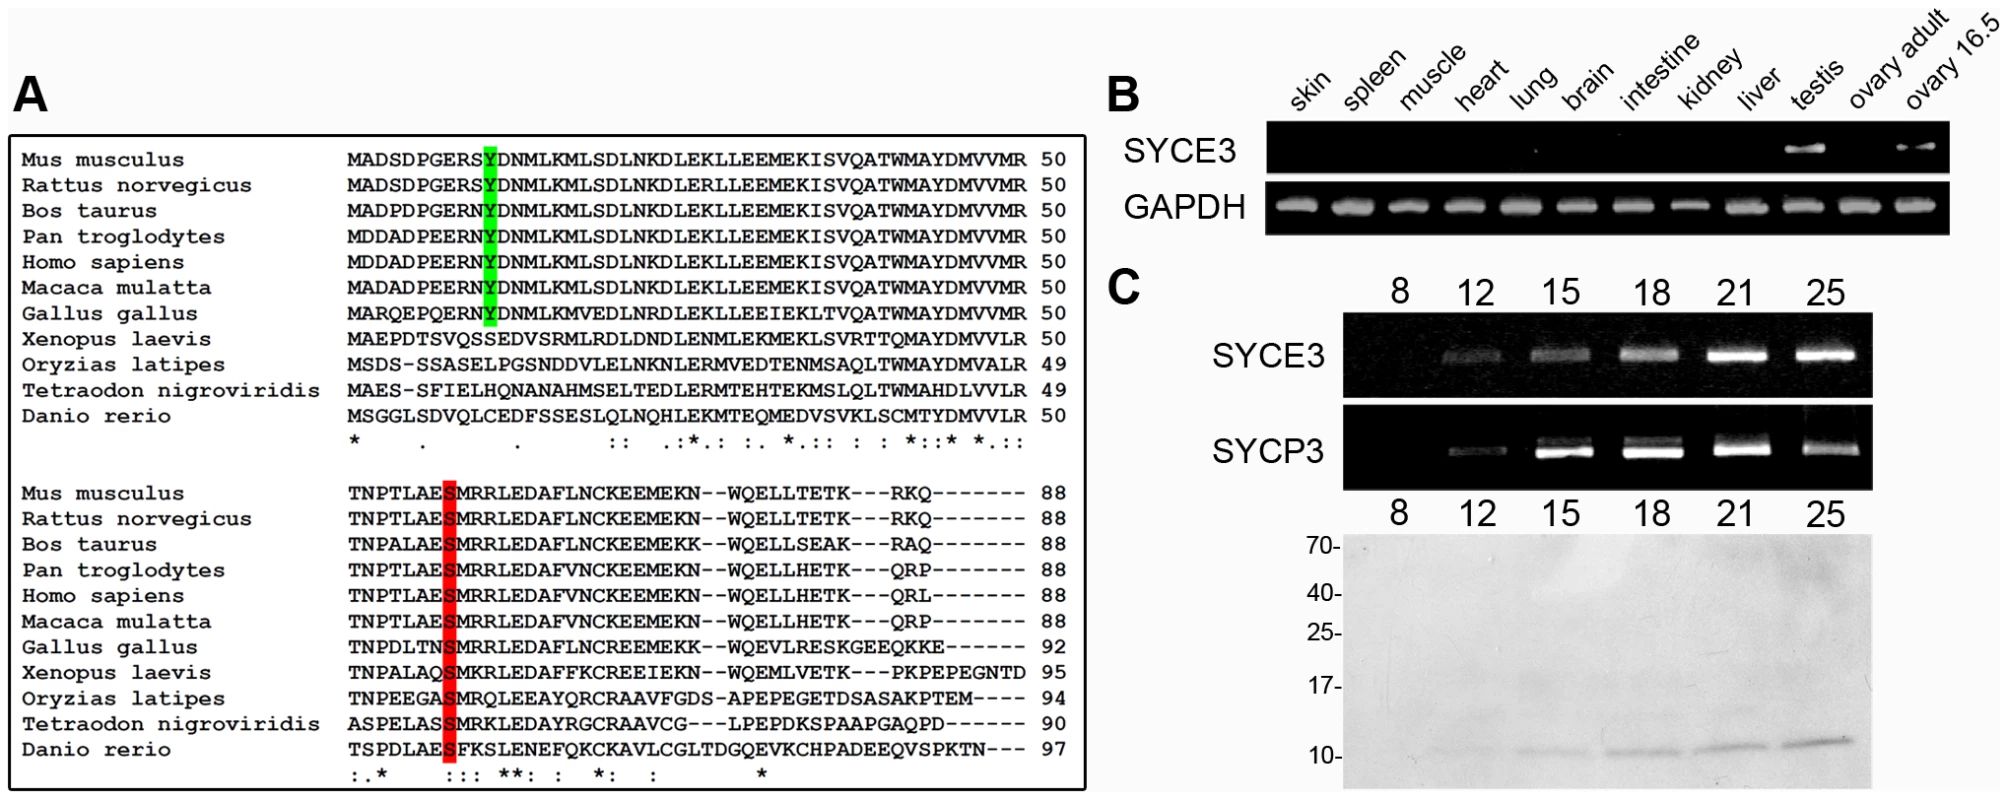 Identification and characterization of mouse SYCE3.